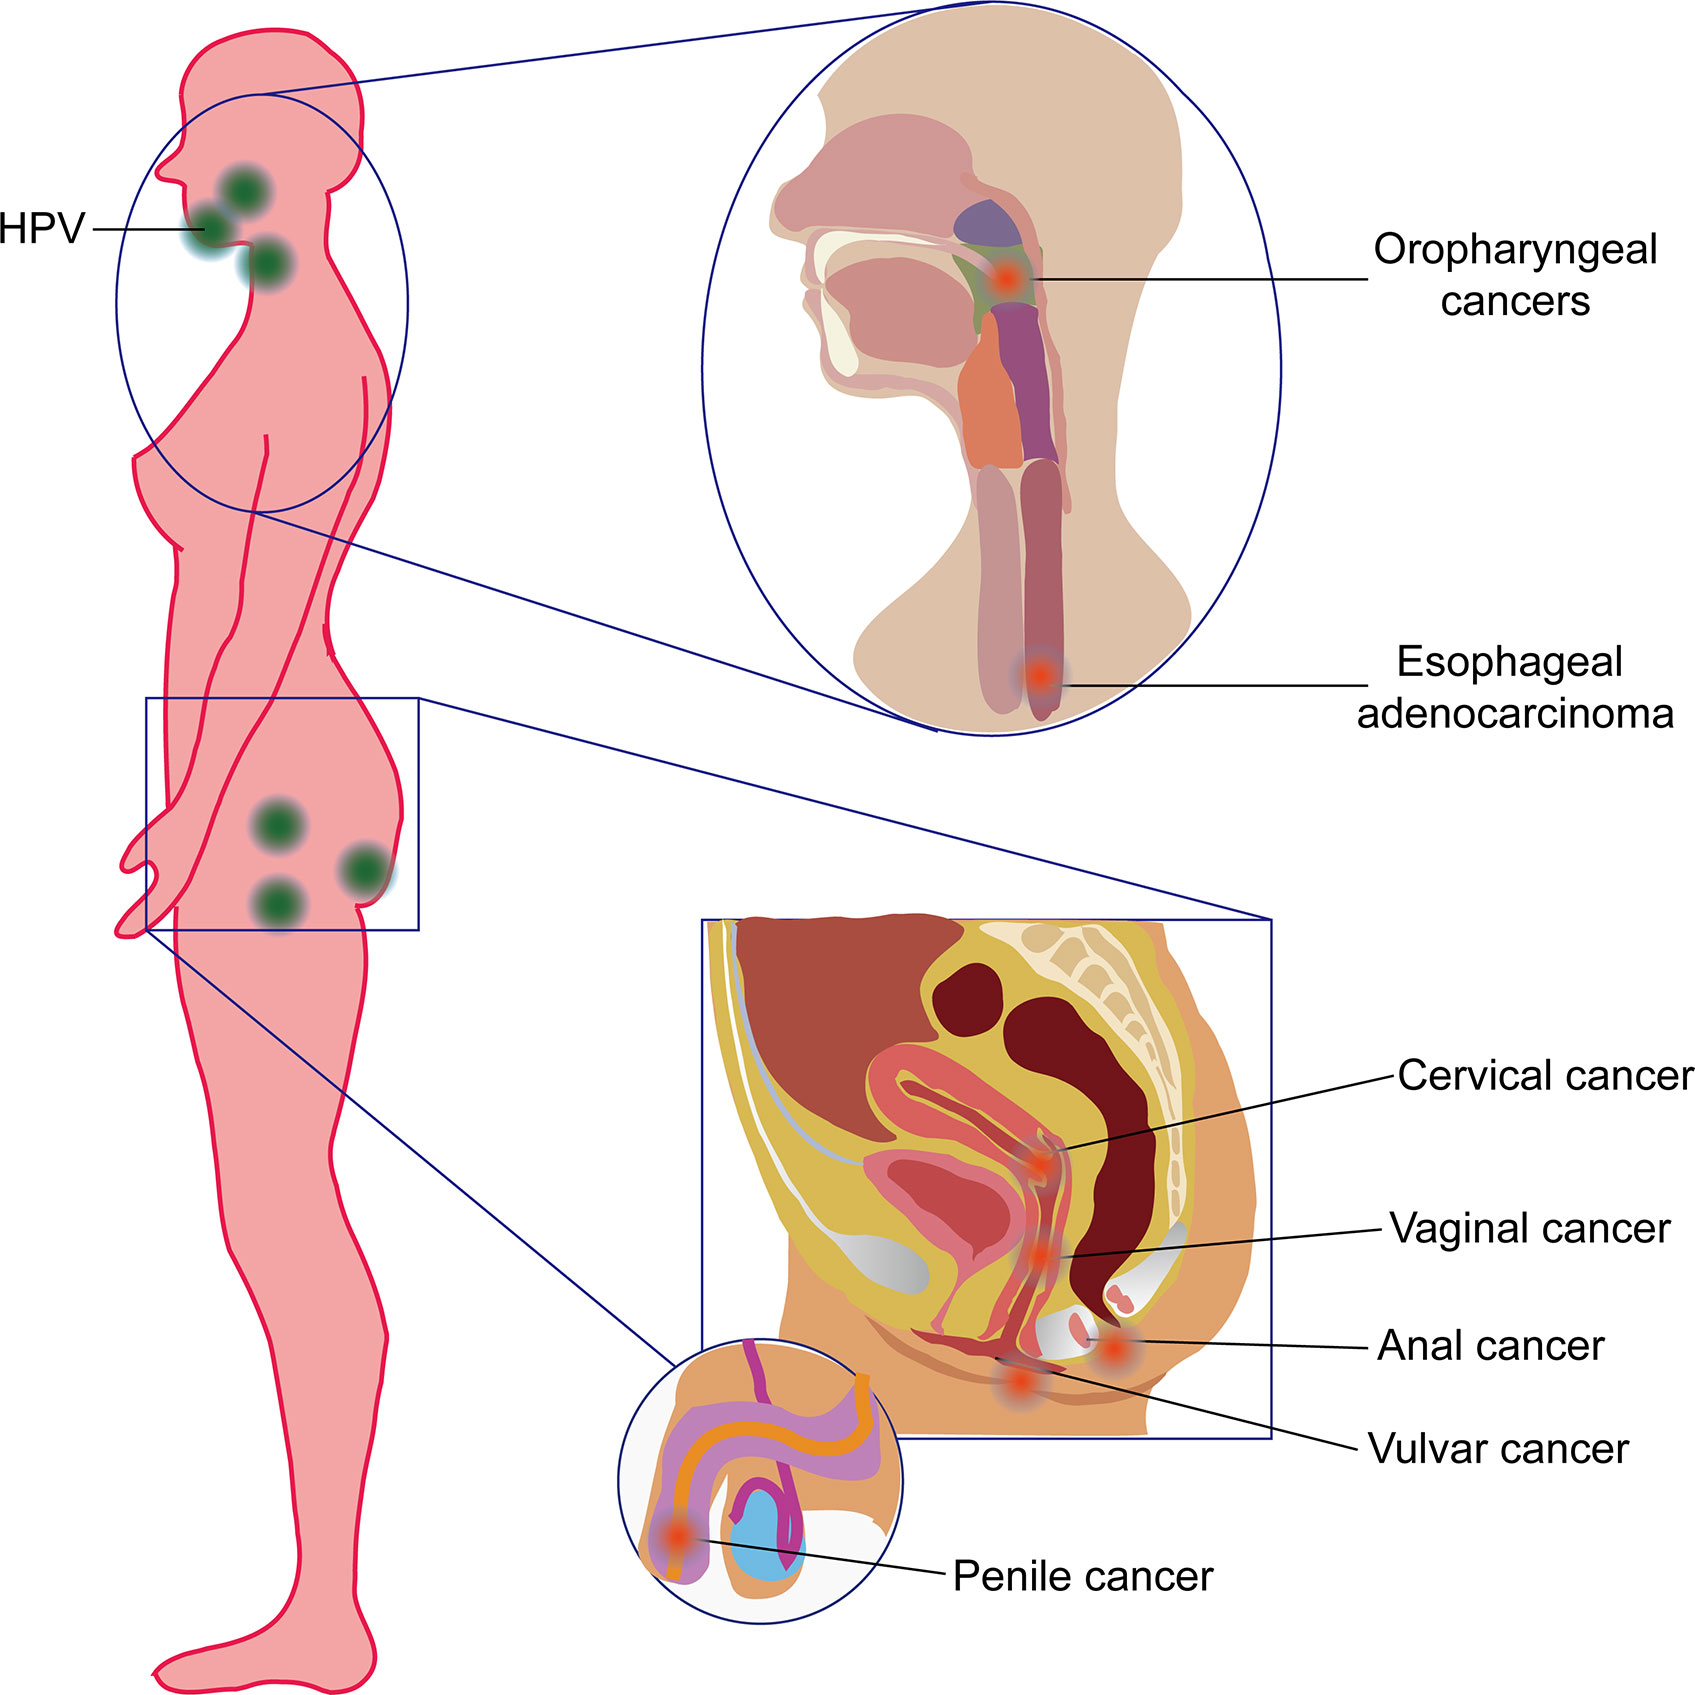 can hpv cause esophageal cancer